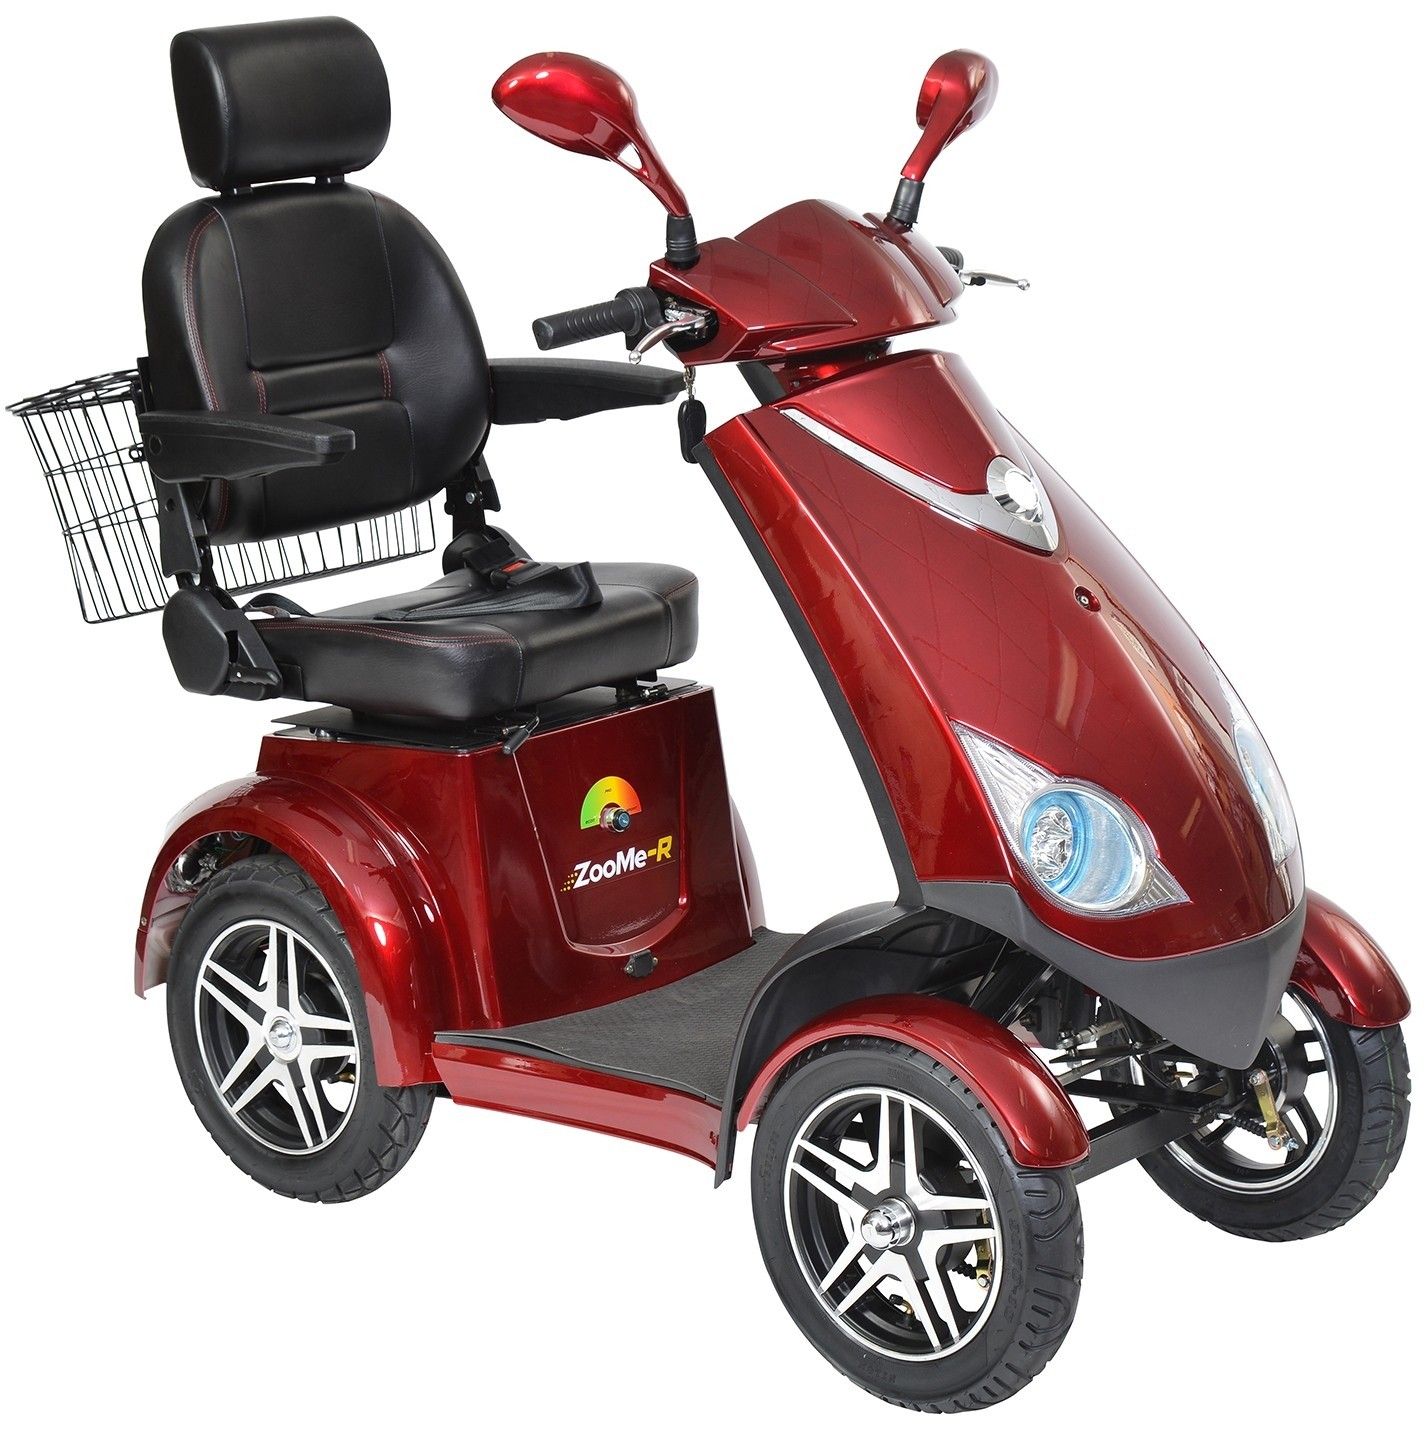 insulator jage Ved Disability Scooters With High Weight Capacities and Strong Performance